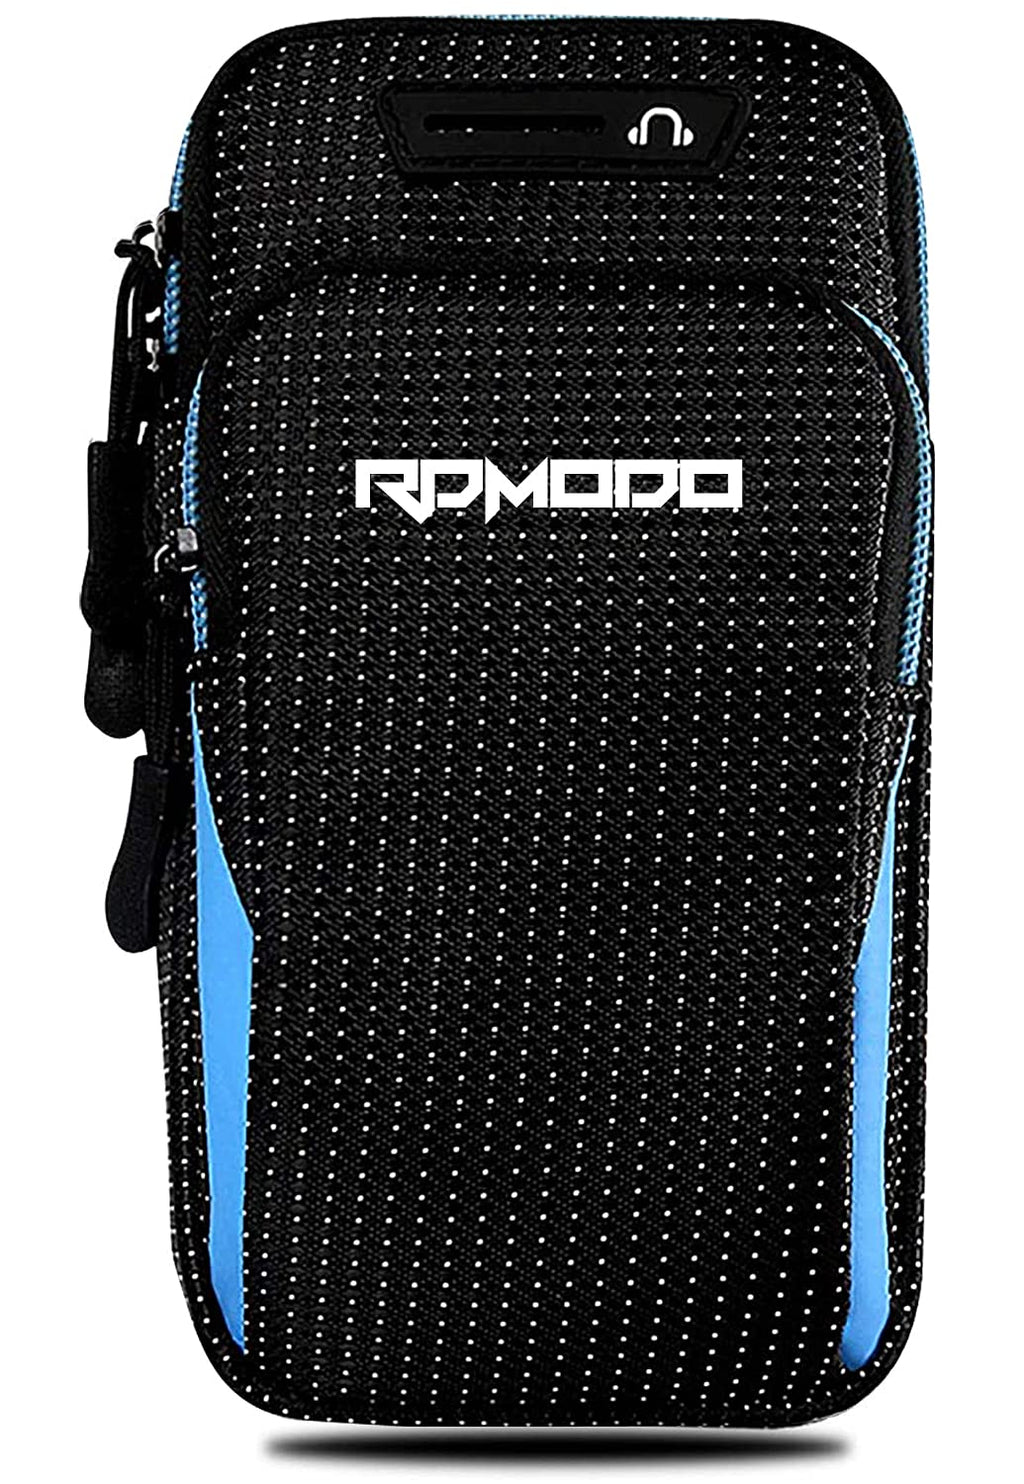 [Australia - AusPower] - RDMODO Armband for Running Workout Armband for Phone Damp-Proof Phone Holder for Arm Men Women Blue Adjustable Arm Band Case for iPhone 11 Pro Max Xs Xr X 12 10 8 7 Plus Samsung Galaxy S20 S10 S9 S8 Black + Blue 6.6 inches 